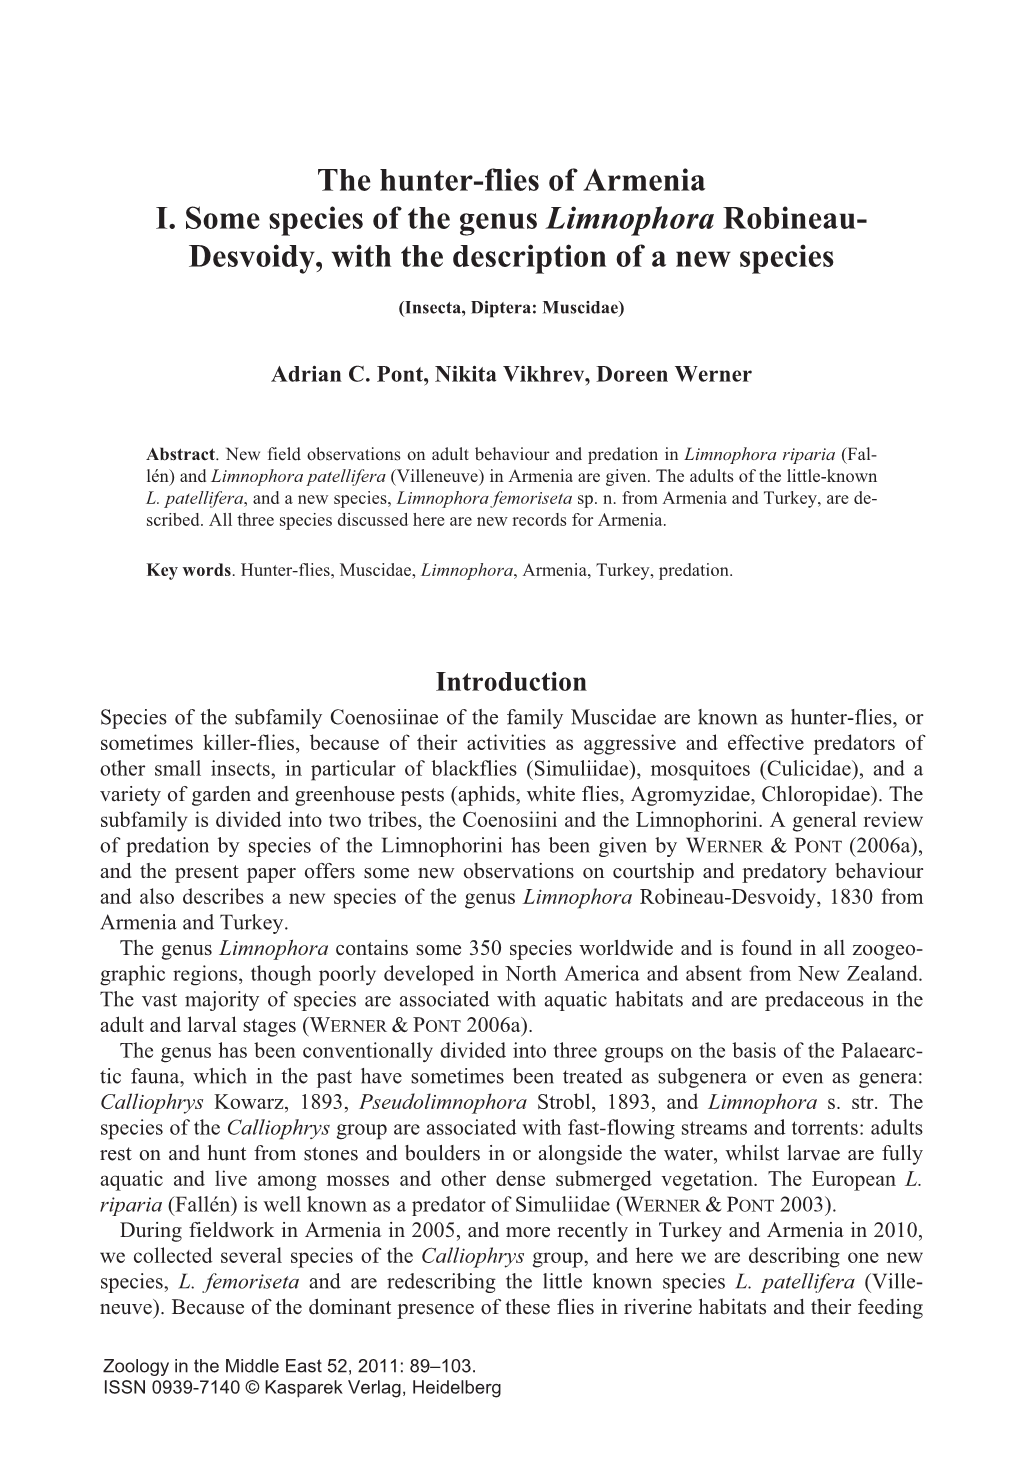 The Hunter-Flies of Armenia I. Some Species of the Genus Limnophora Robineau- Desvoidy, with the Description of a New Species